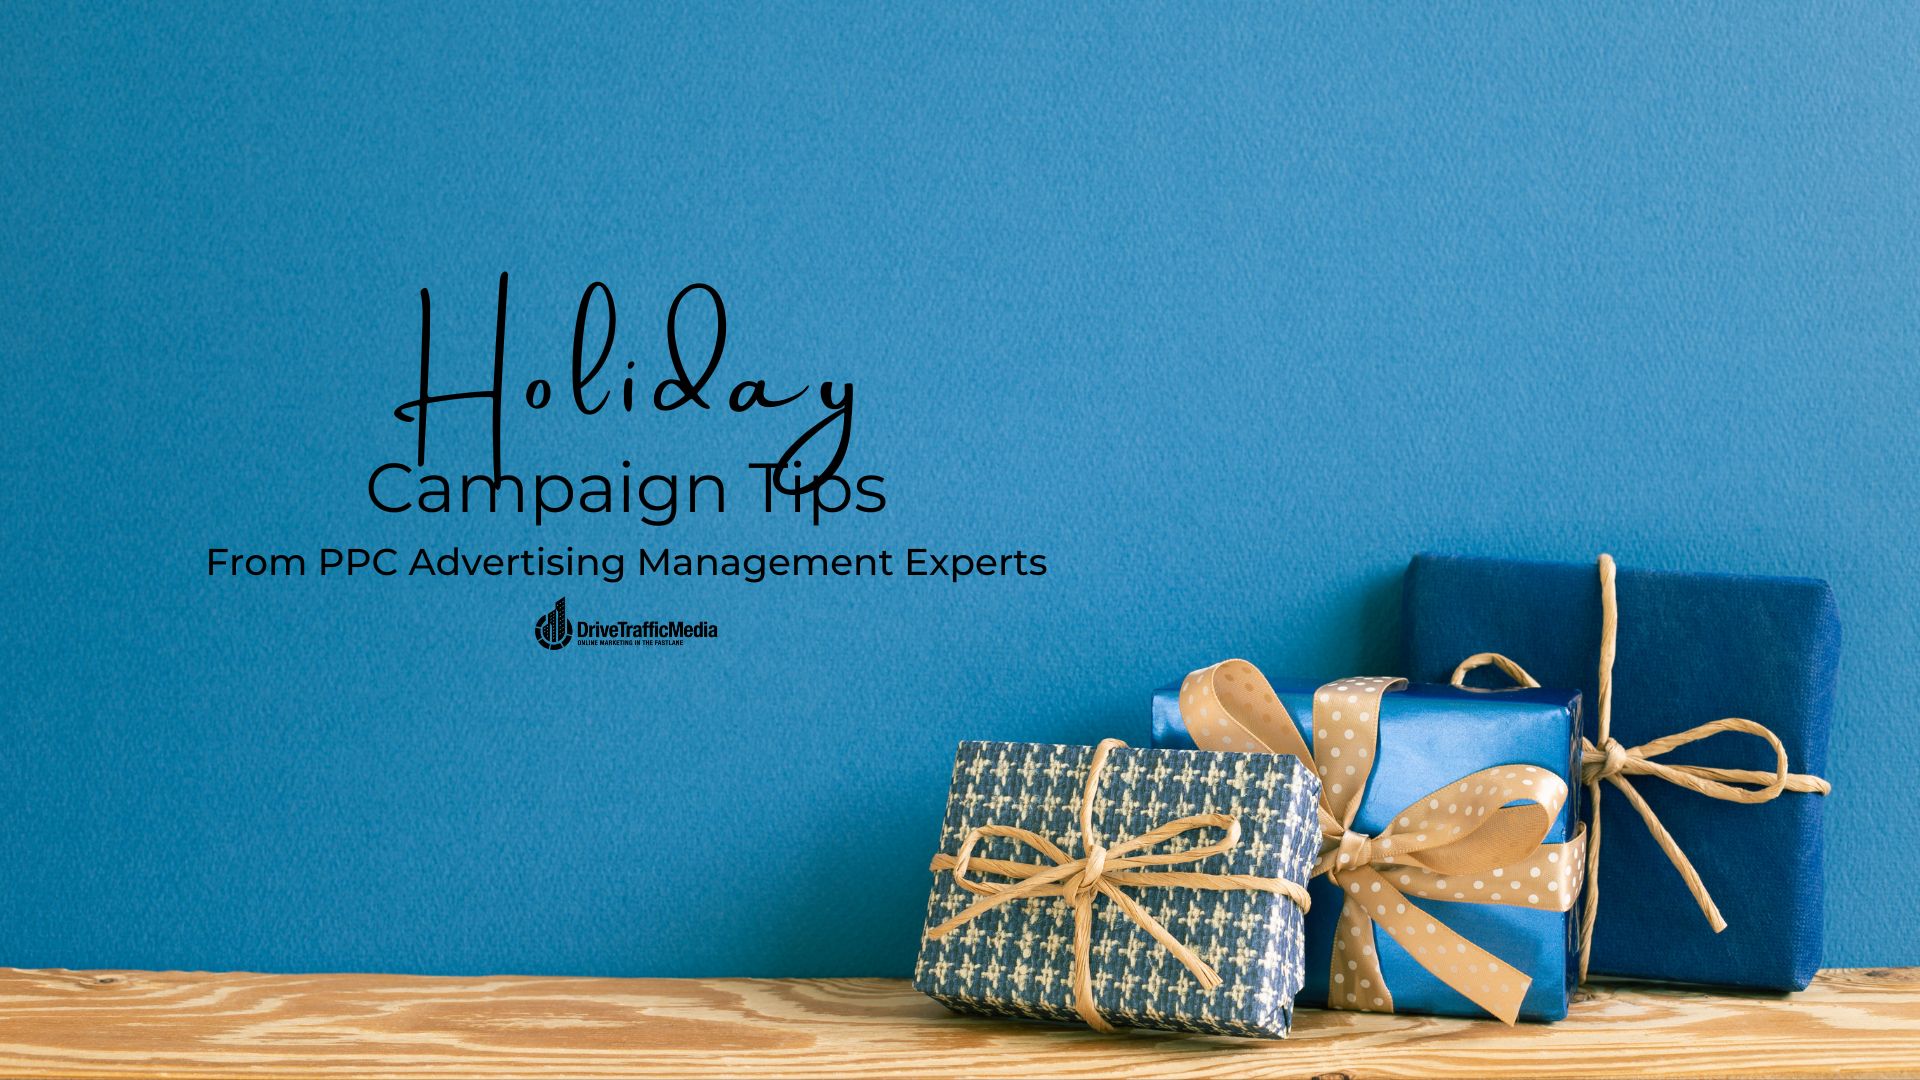 ppc-advertising-management-tips-for-the-holiday-season